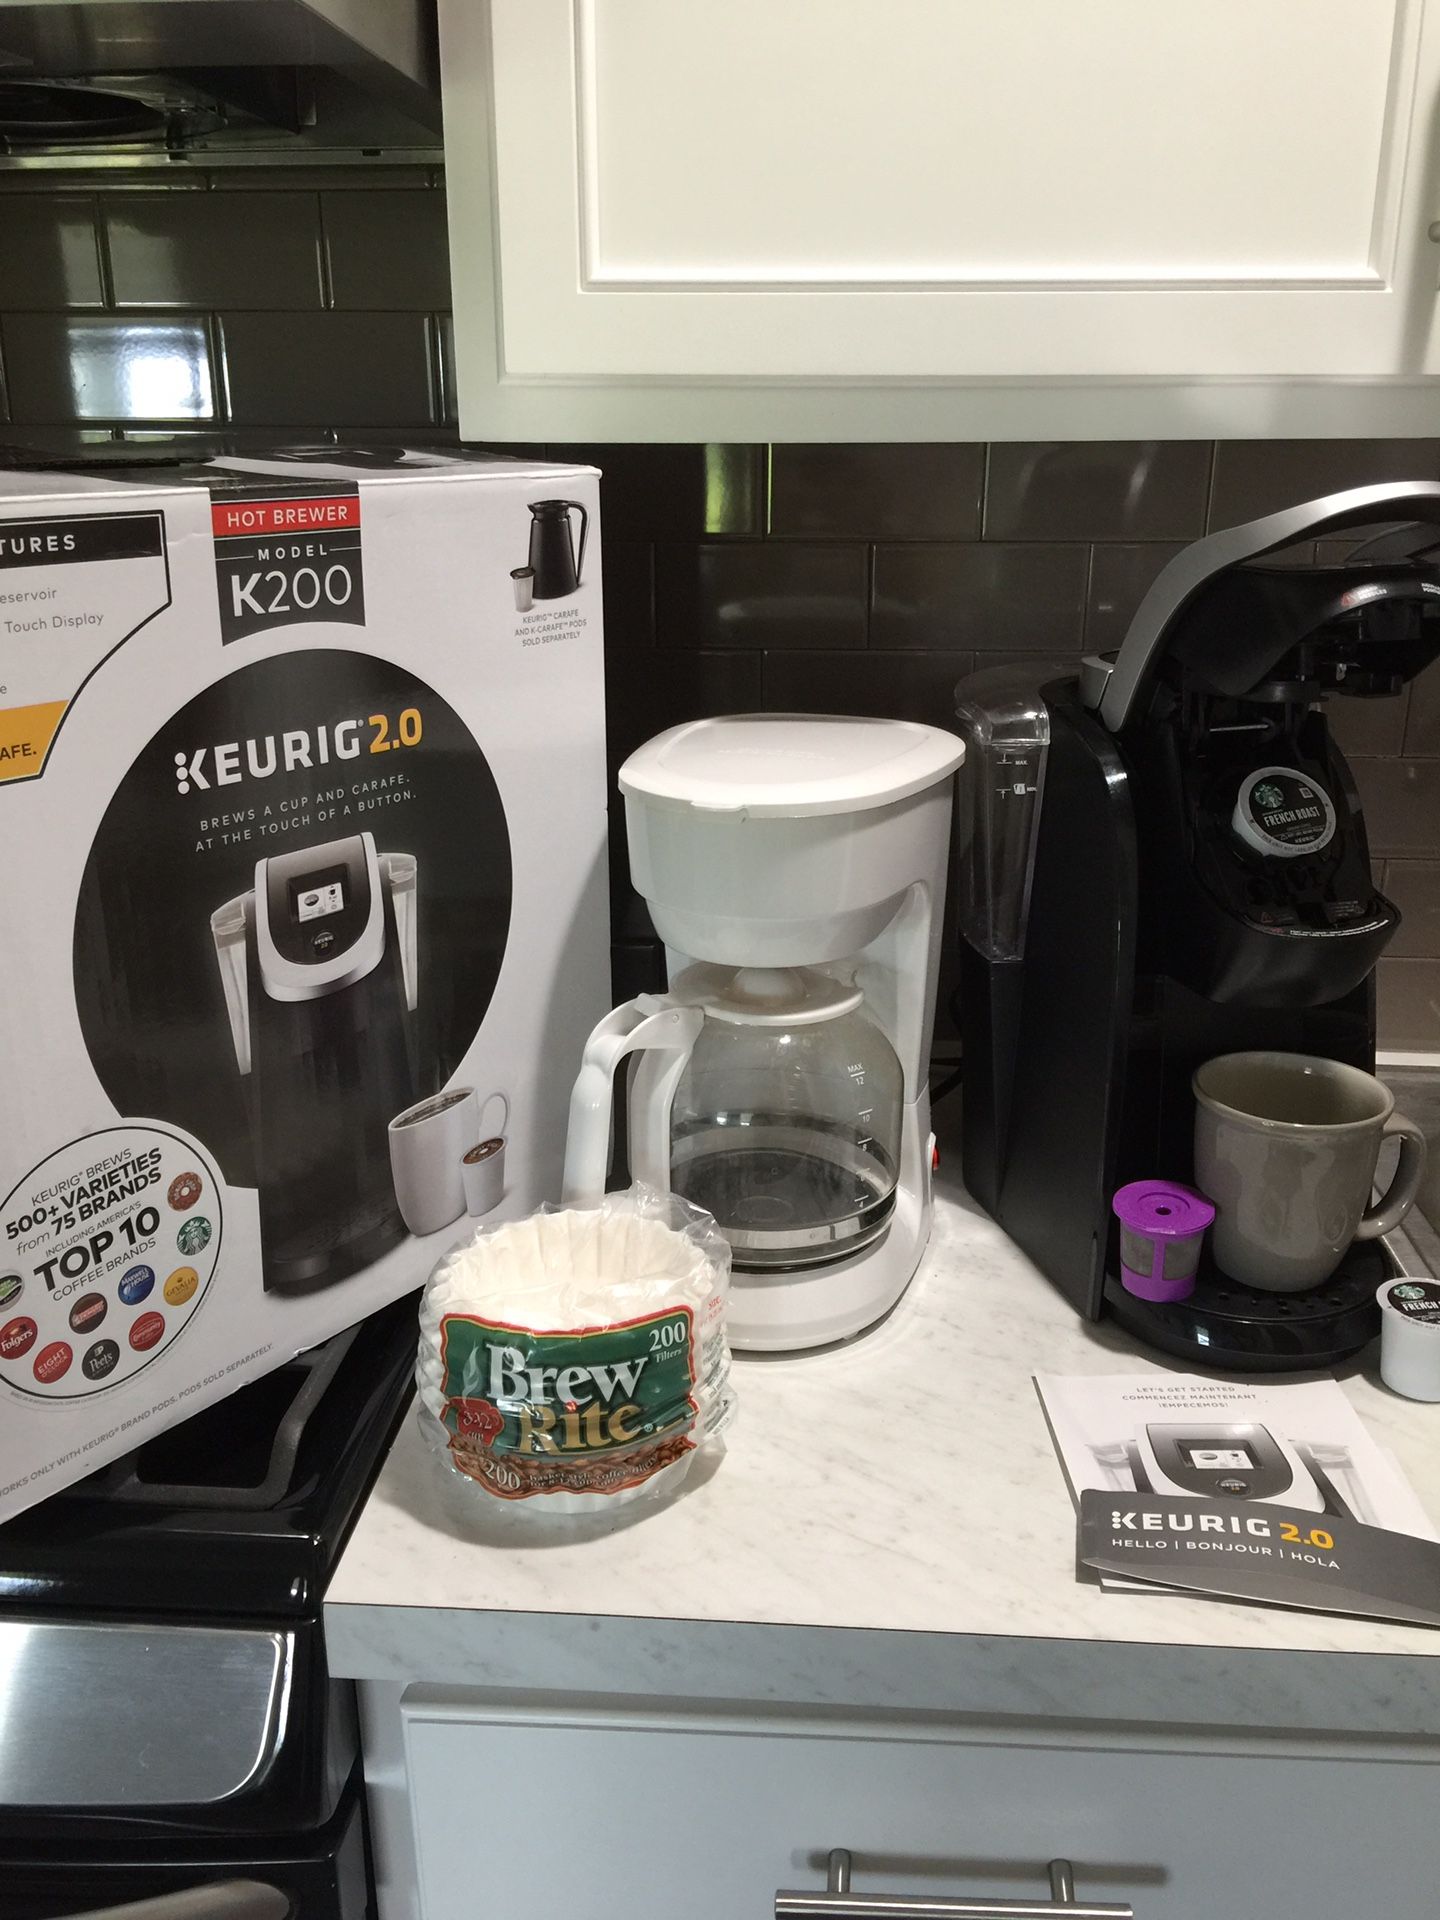 2 FOR1...Keurig 2.0 machine and 12 Cup Regular Coffee Maker